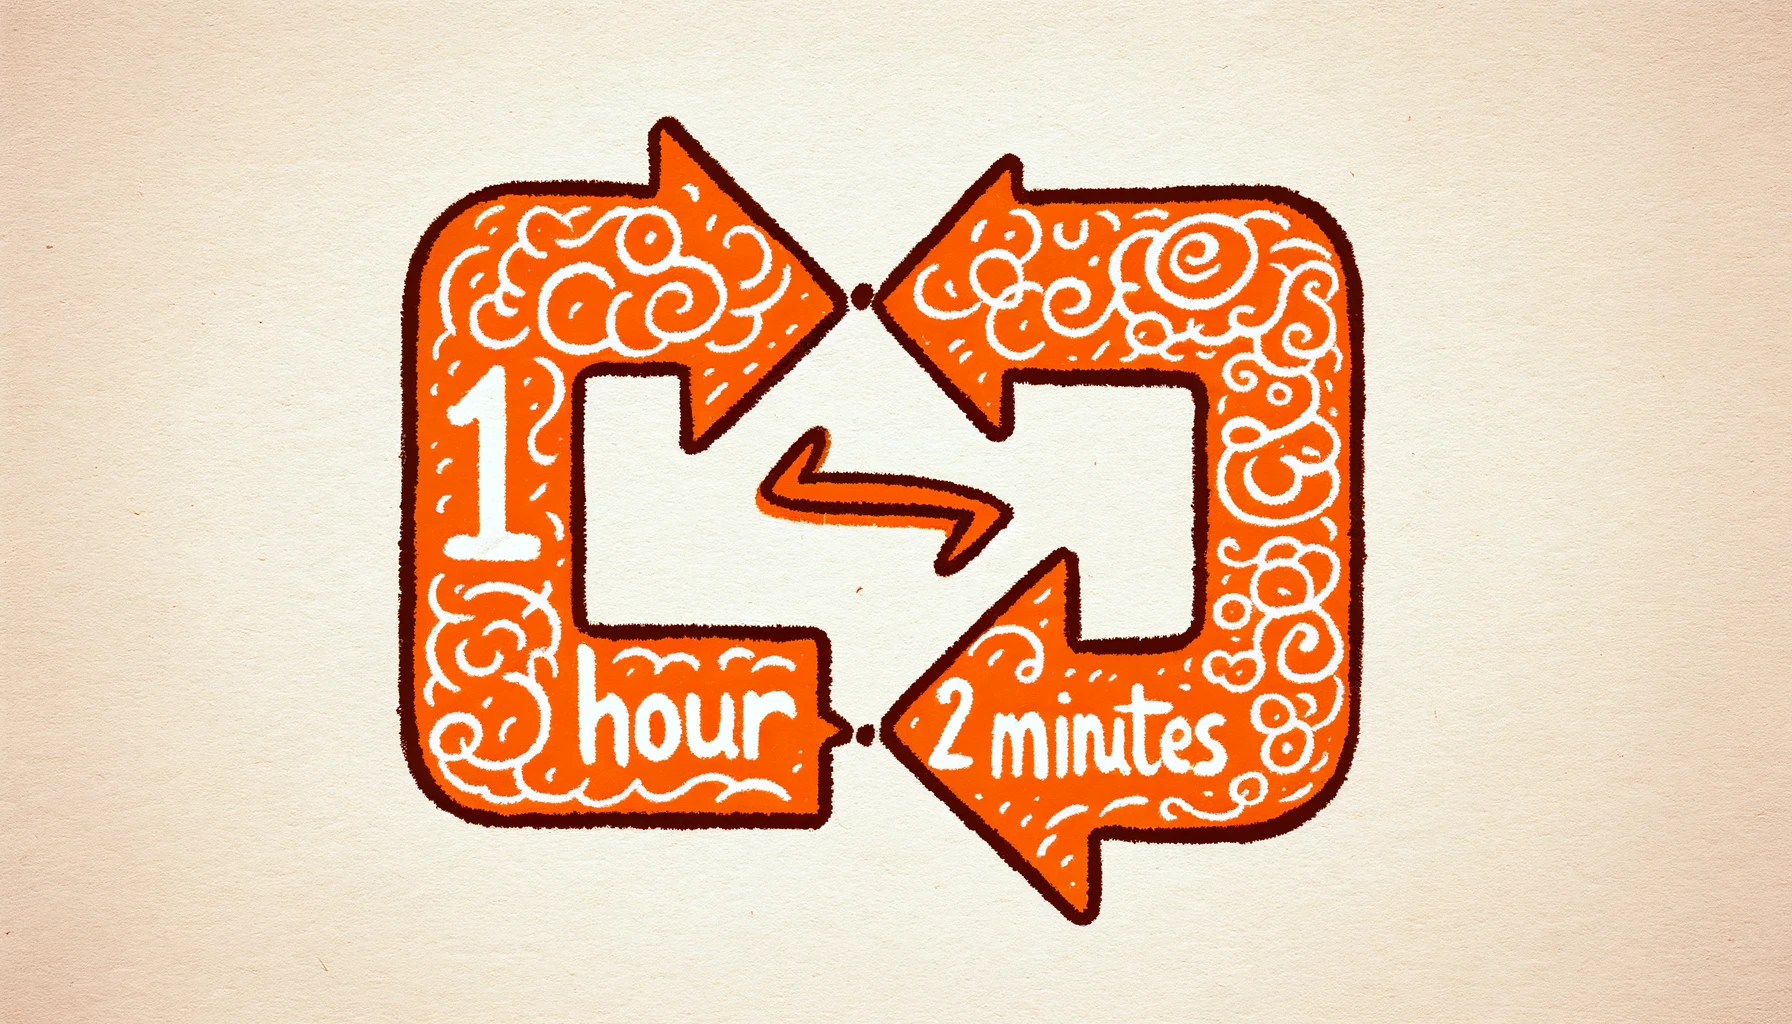 Transform an Hour-Long Video into a 2-Minute Reading Session